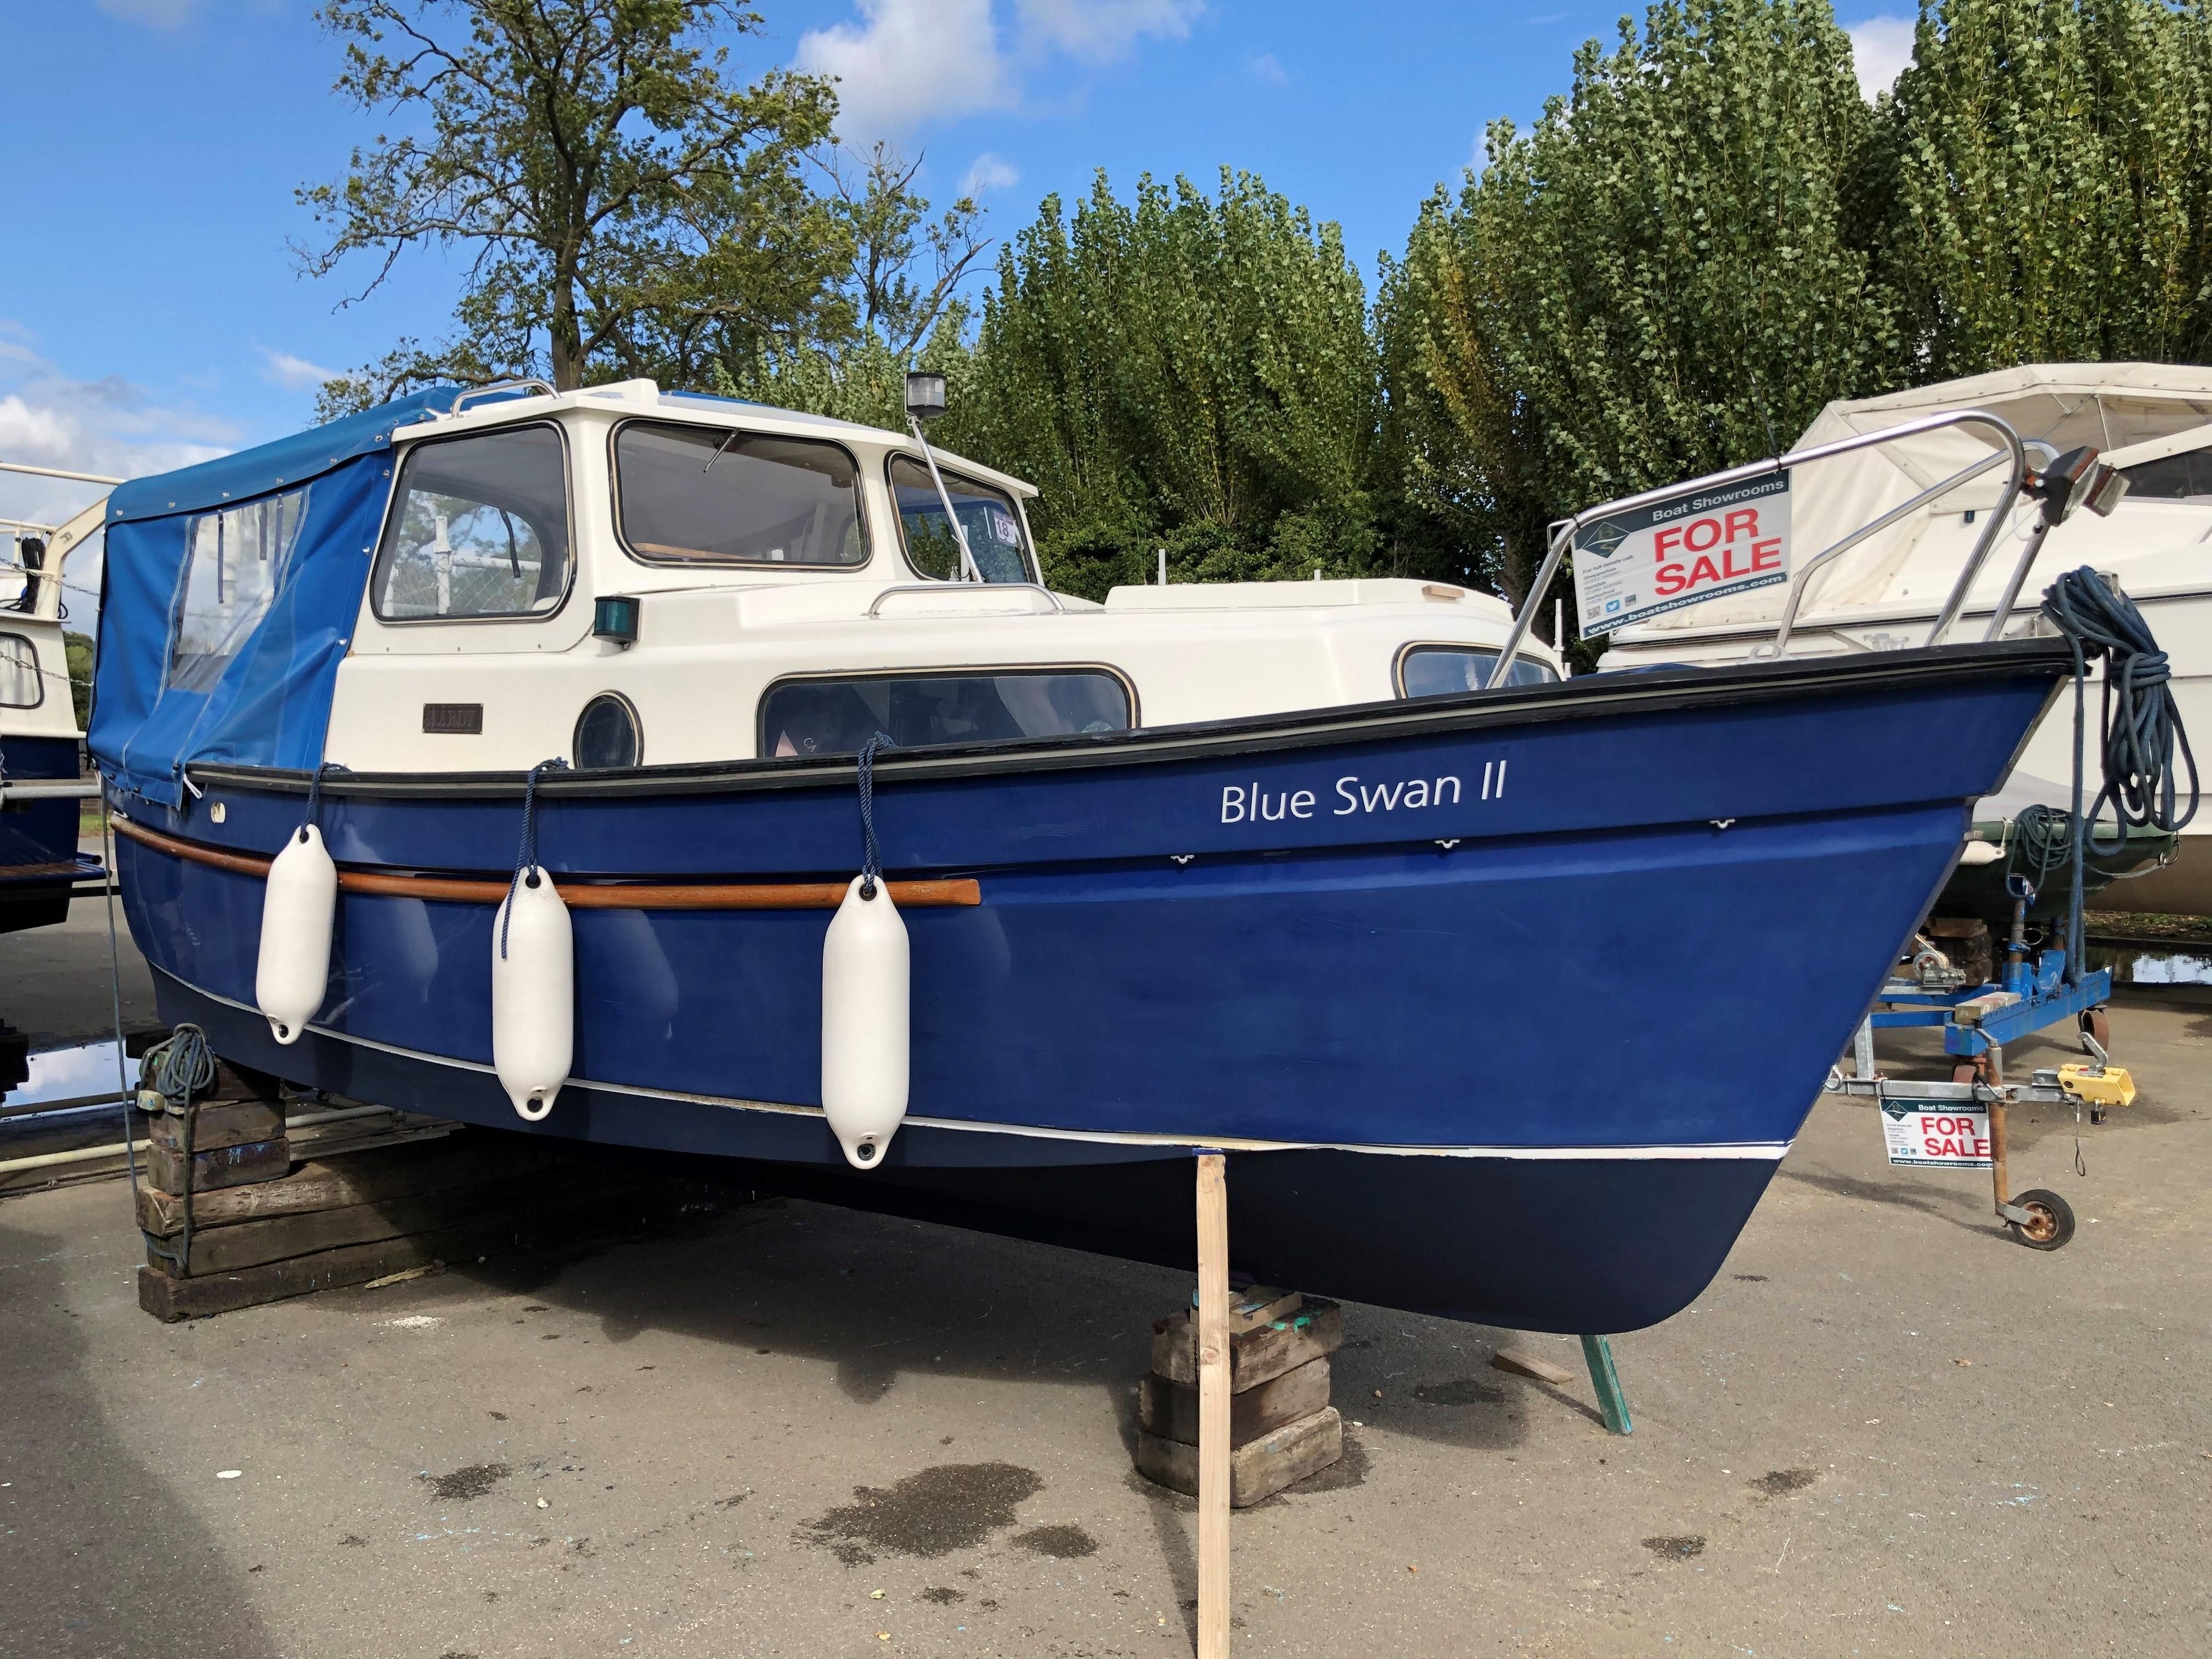 hardy yachts for sale uk